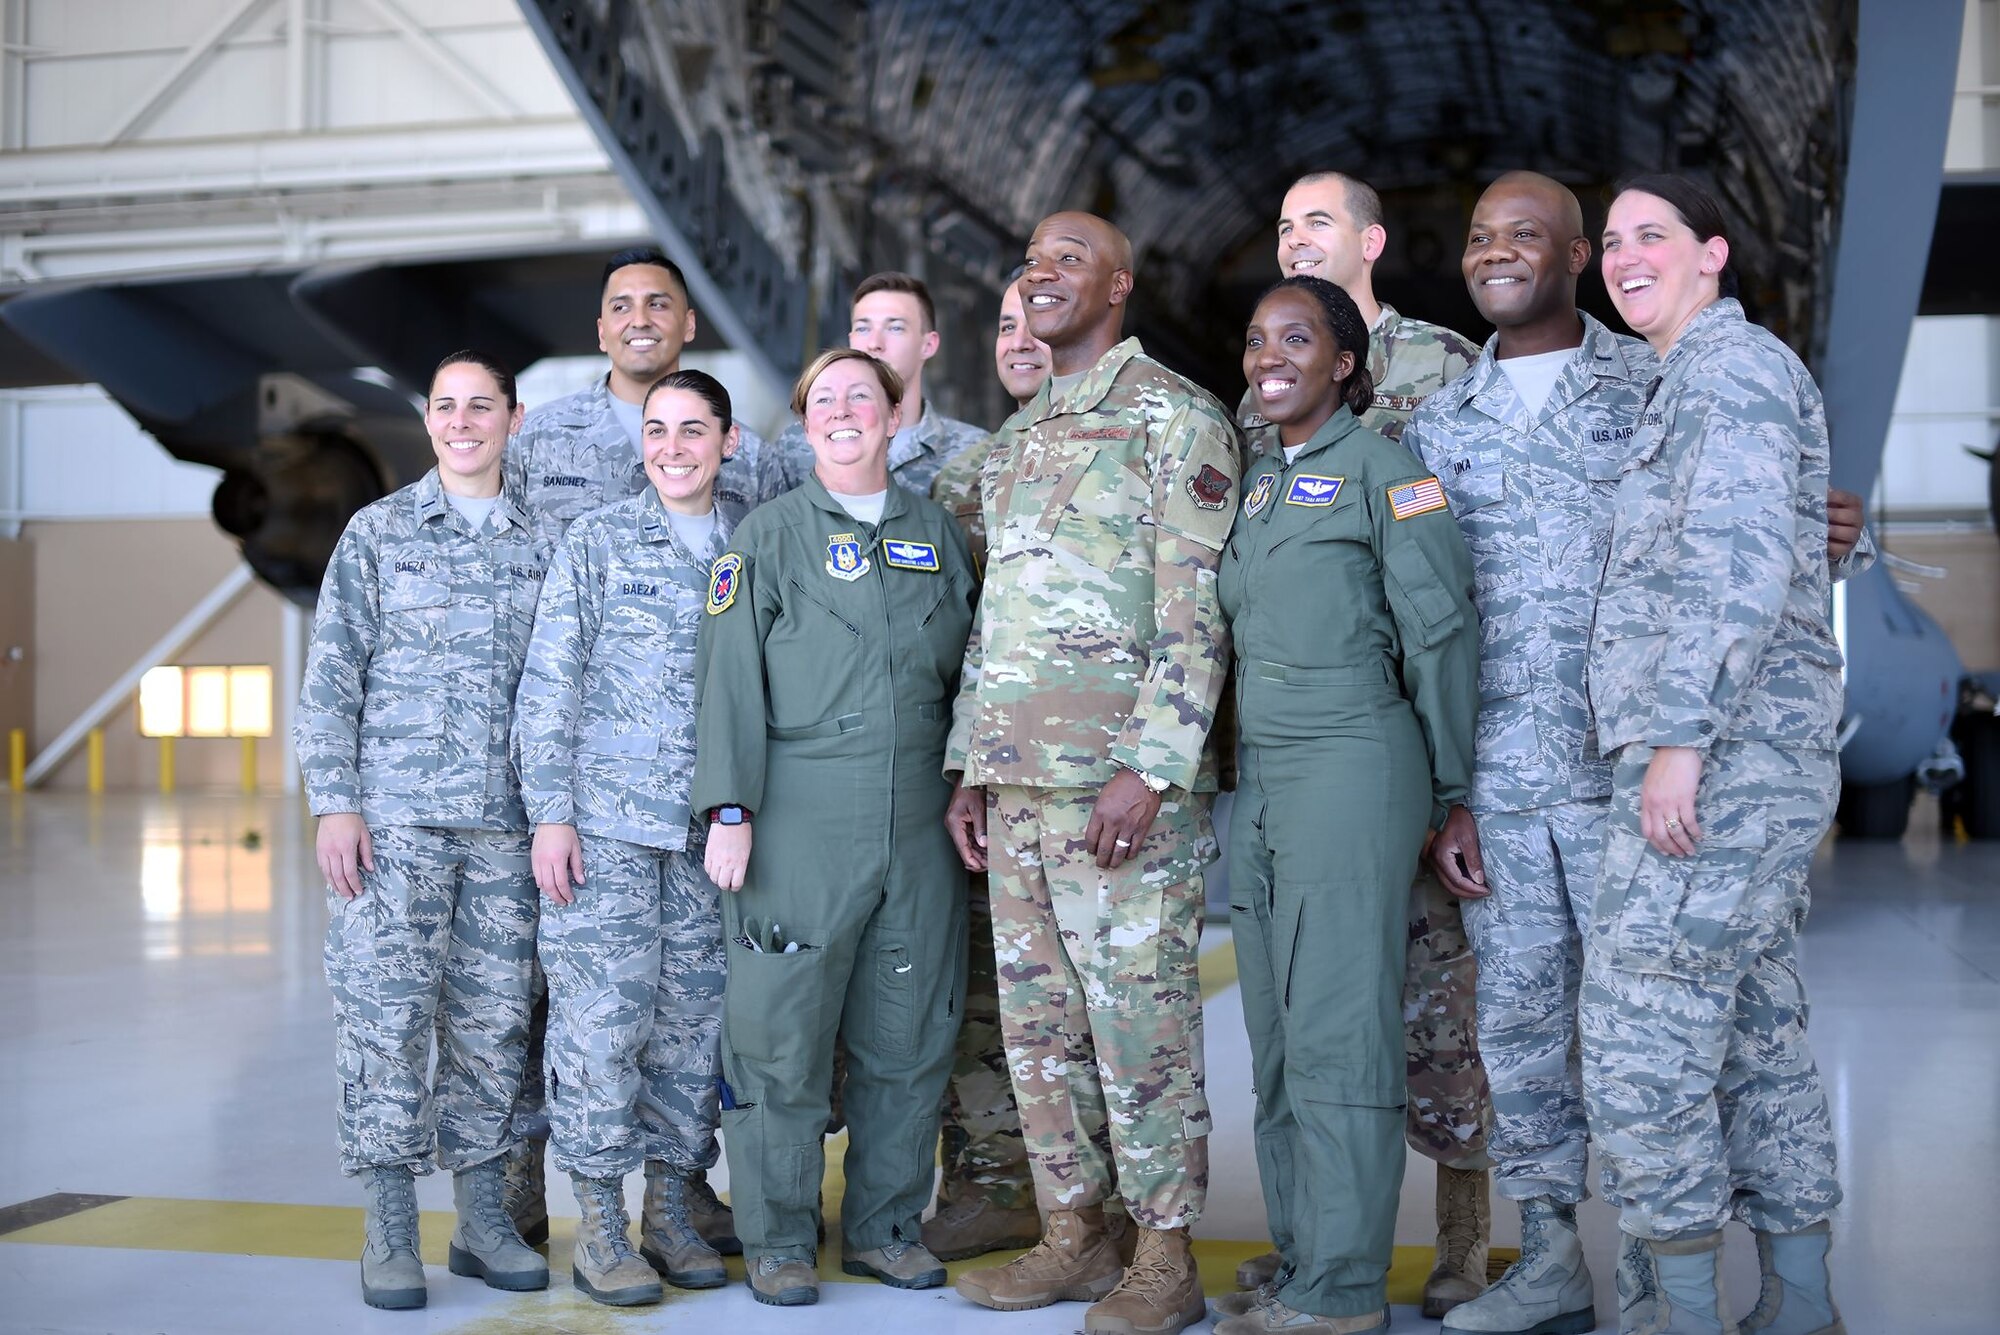 Chief Wright is surrounded by Airmen in an aircraft hangar. They're posing for a picture. They're smiling.